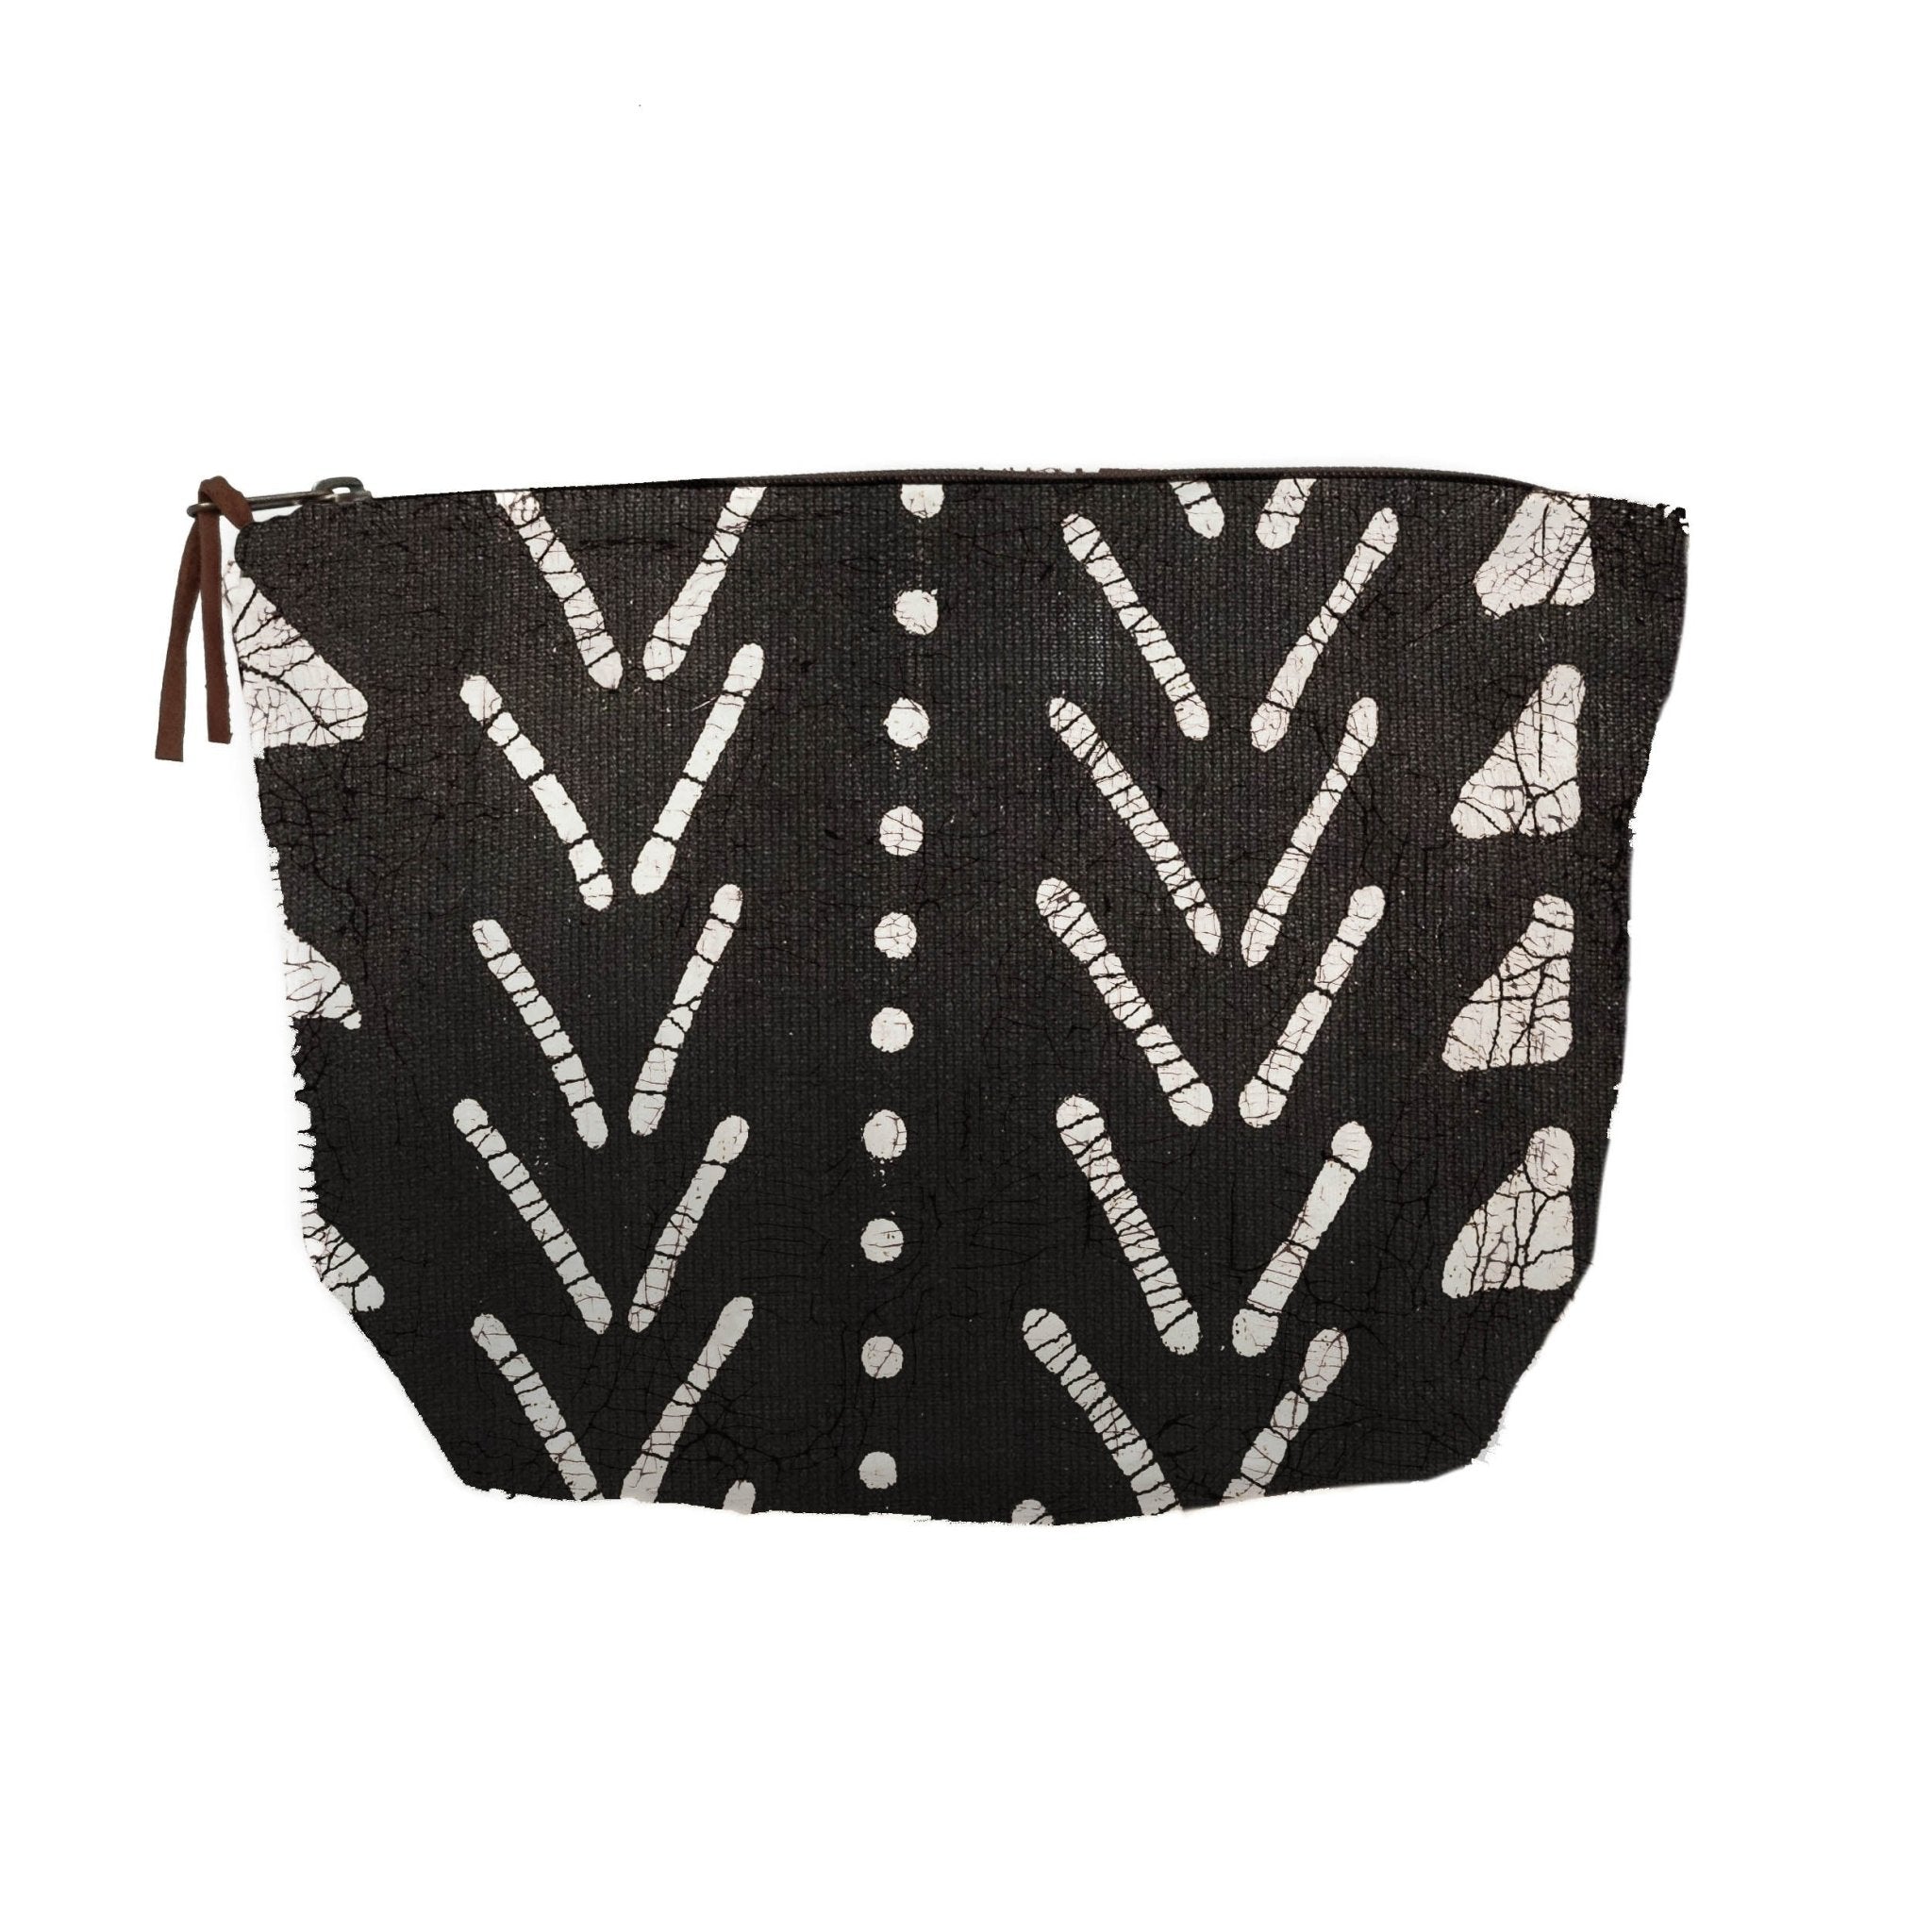 Matika Black Linear Wash Bag - Hand Painted by TRIBAL TEXTILES - Handcrafted Home Decor Interiors - African Made